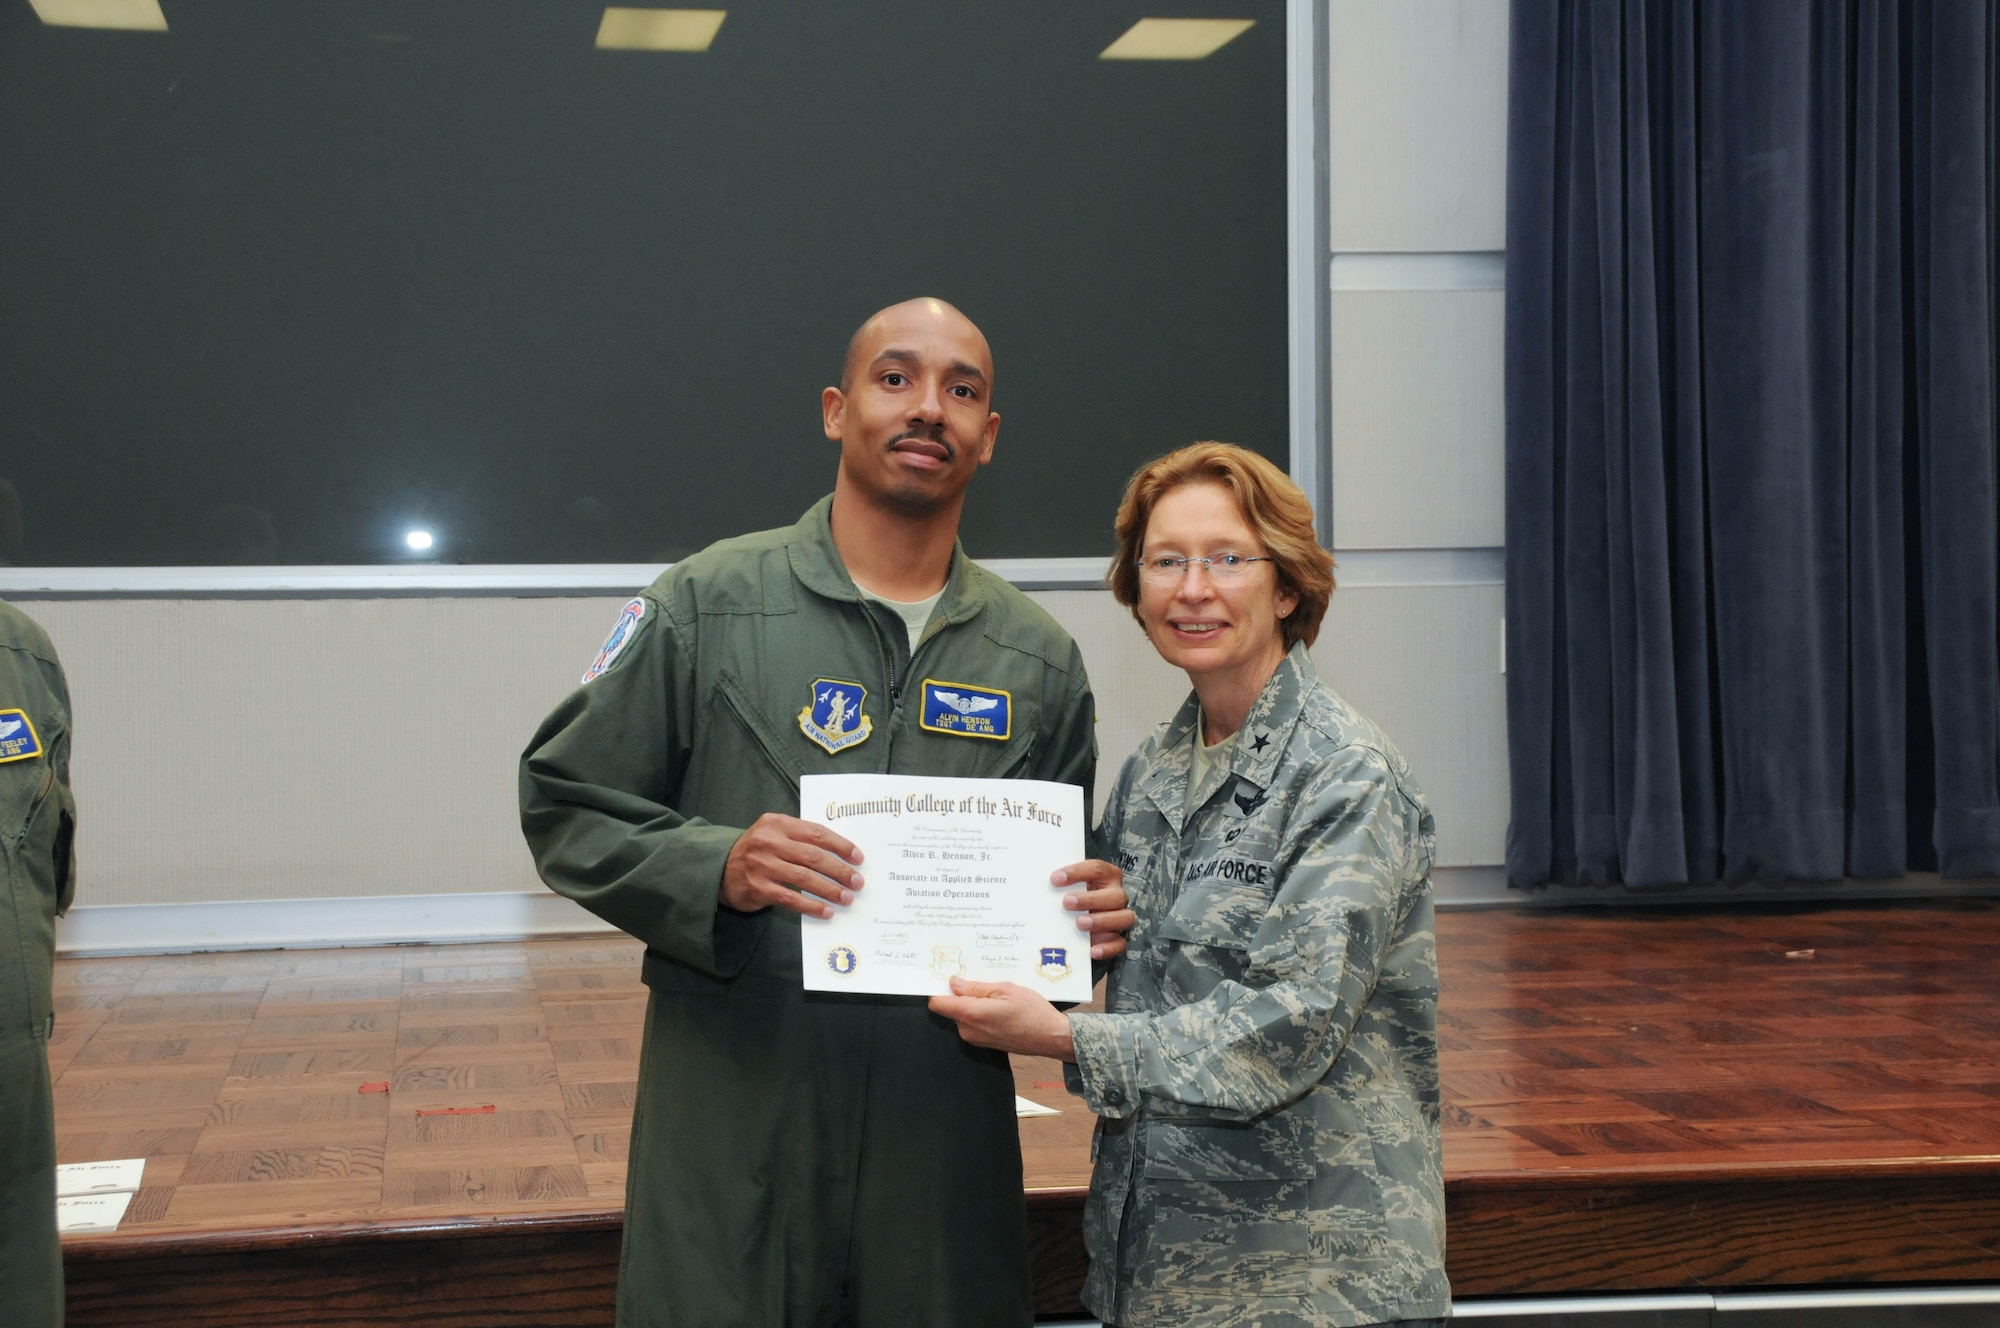 U.S. Air Force Tech. Sgt. Alvin Henson, left, a member of the 142nd Airlift Squadron, 166th Airlift Wing, receives a certificate from Brig. Gen. Carol Timmons, assistant adjutant general for air, Delaware National Guard to recognize Henson’s attainment of a Community College of the Air Force associate of applied science degree in aviation operations at a CCAF Class of October 2013 graduation ceremony held Nov. 3, 2013 at the New Castle Air National Guard Base, Del. (U.S. Air National Guard photo by Tech. Sgt. Robin Meredith)